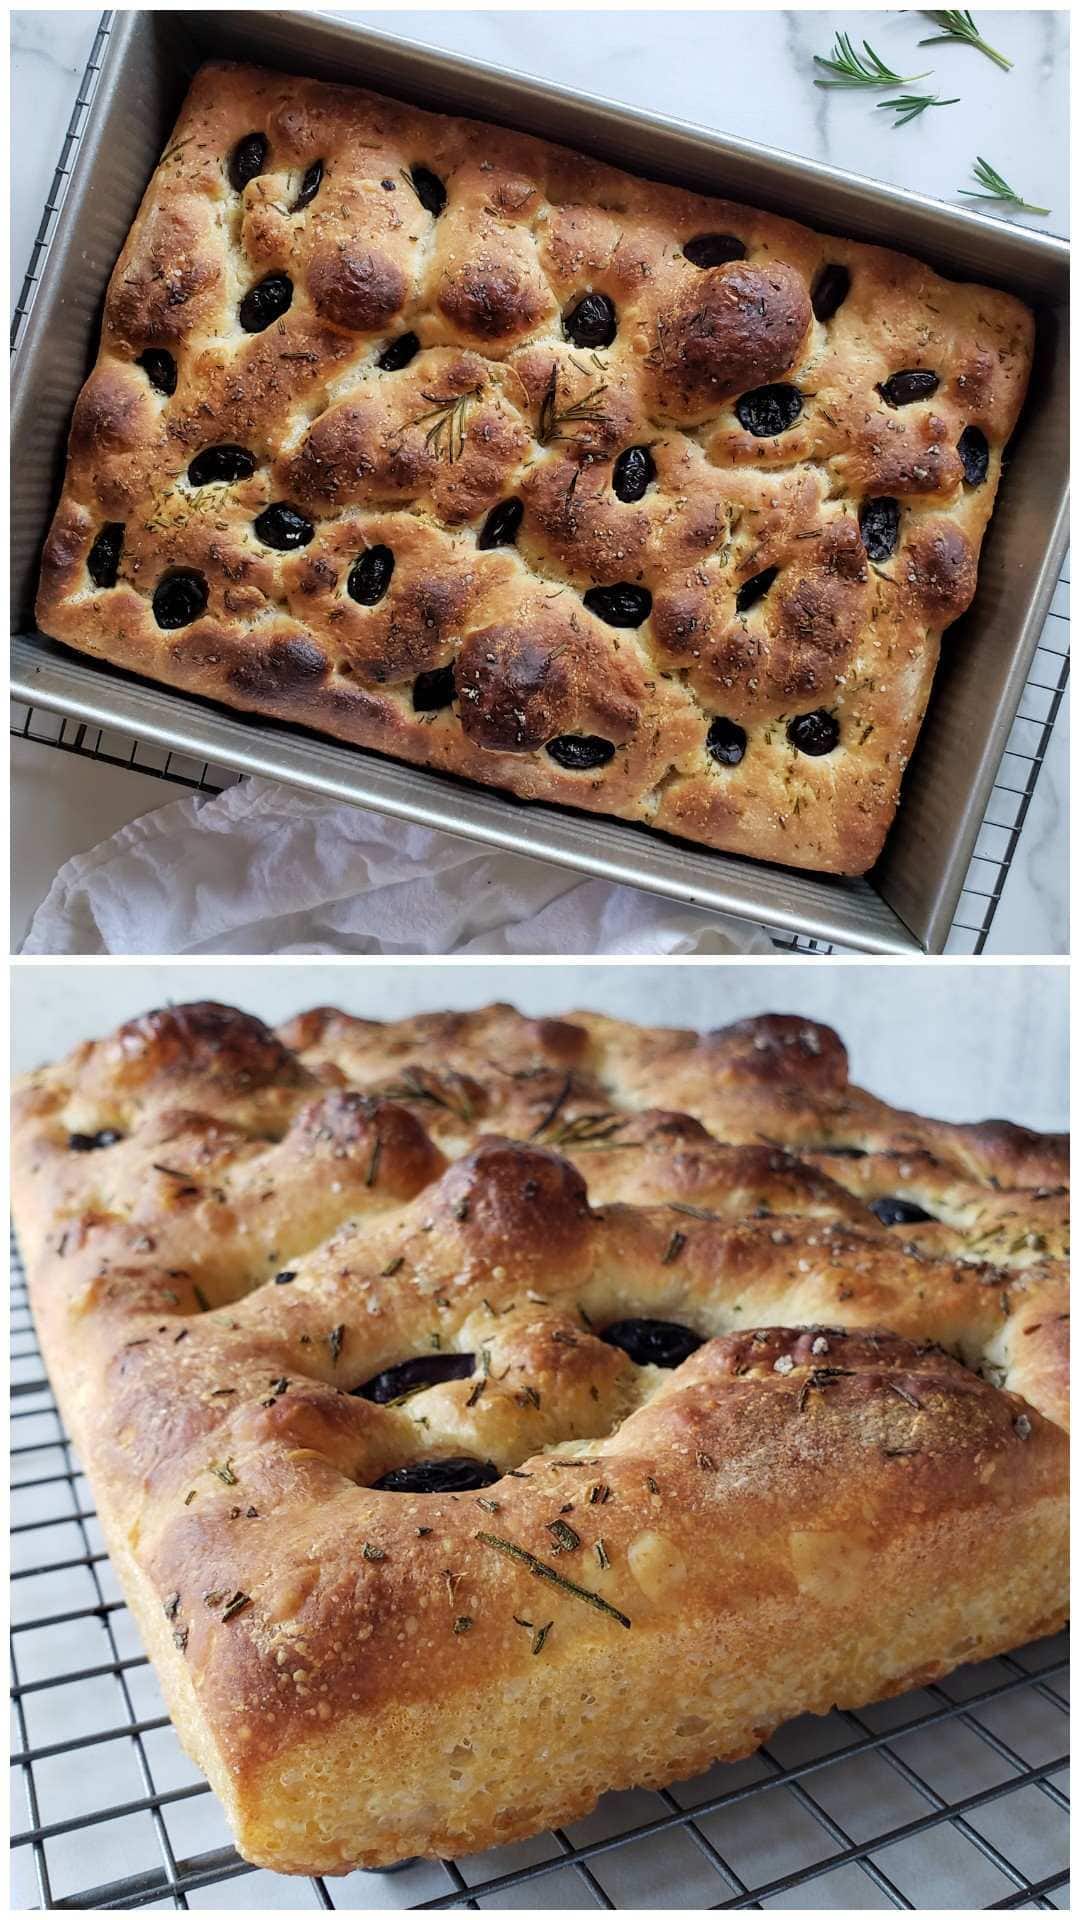 A two part image collage, the first image shows a baking dish full of sourdough focaccia after it has been baked. The top is golden brown to darker brown in some spots and the bread has pulled away from the sides of the pan as it baked. The second image shows the bread cooling on a wire rack, it is a close up image of the side of the bread, illustrating the golden honey colored crispy crust that forms on the bread that was in contact with the baking pan.